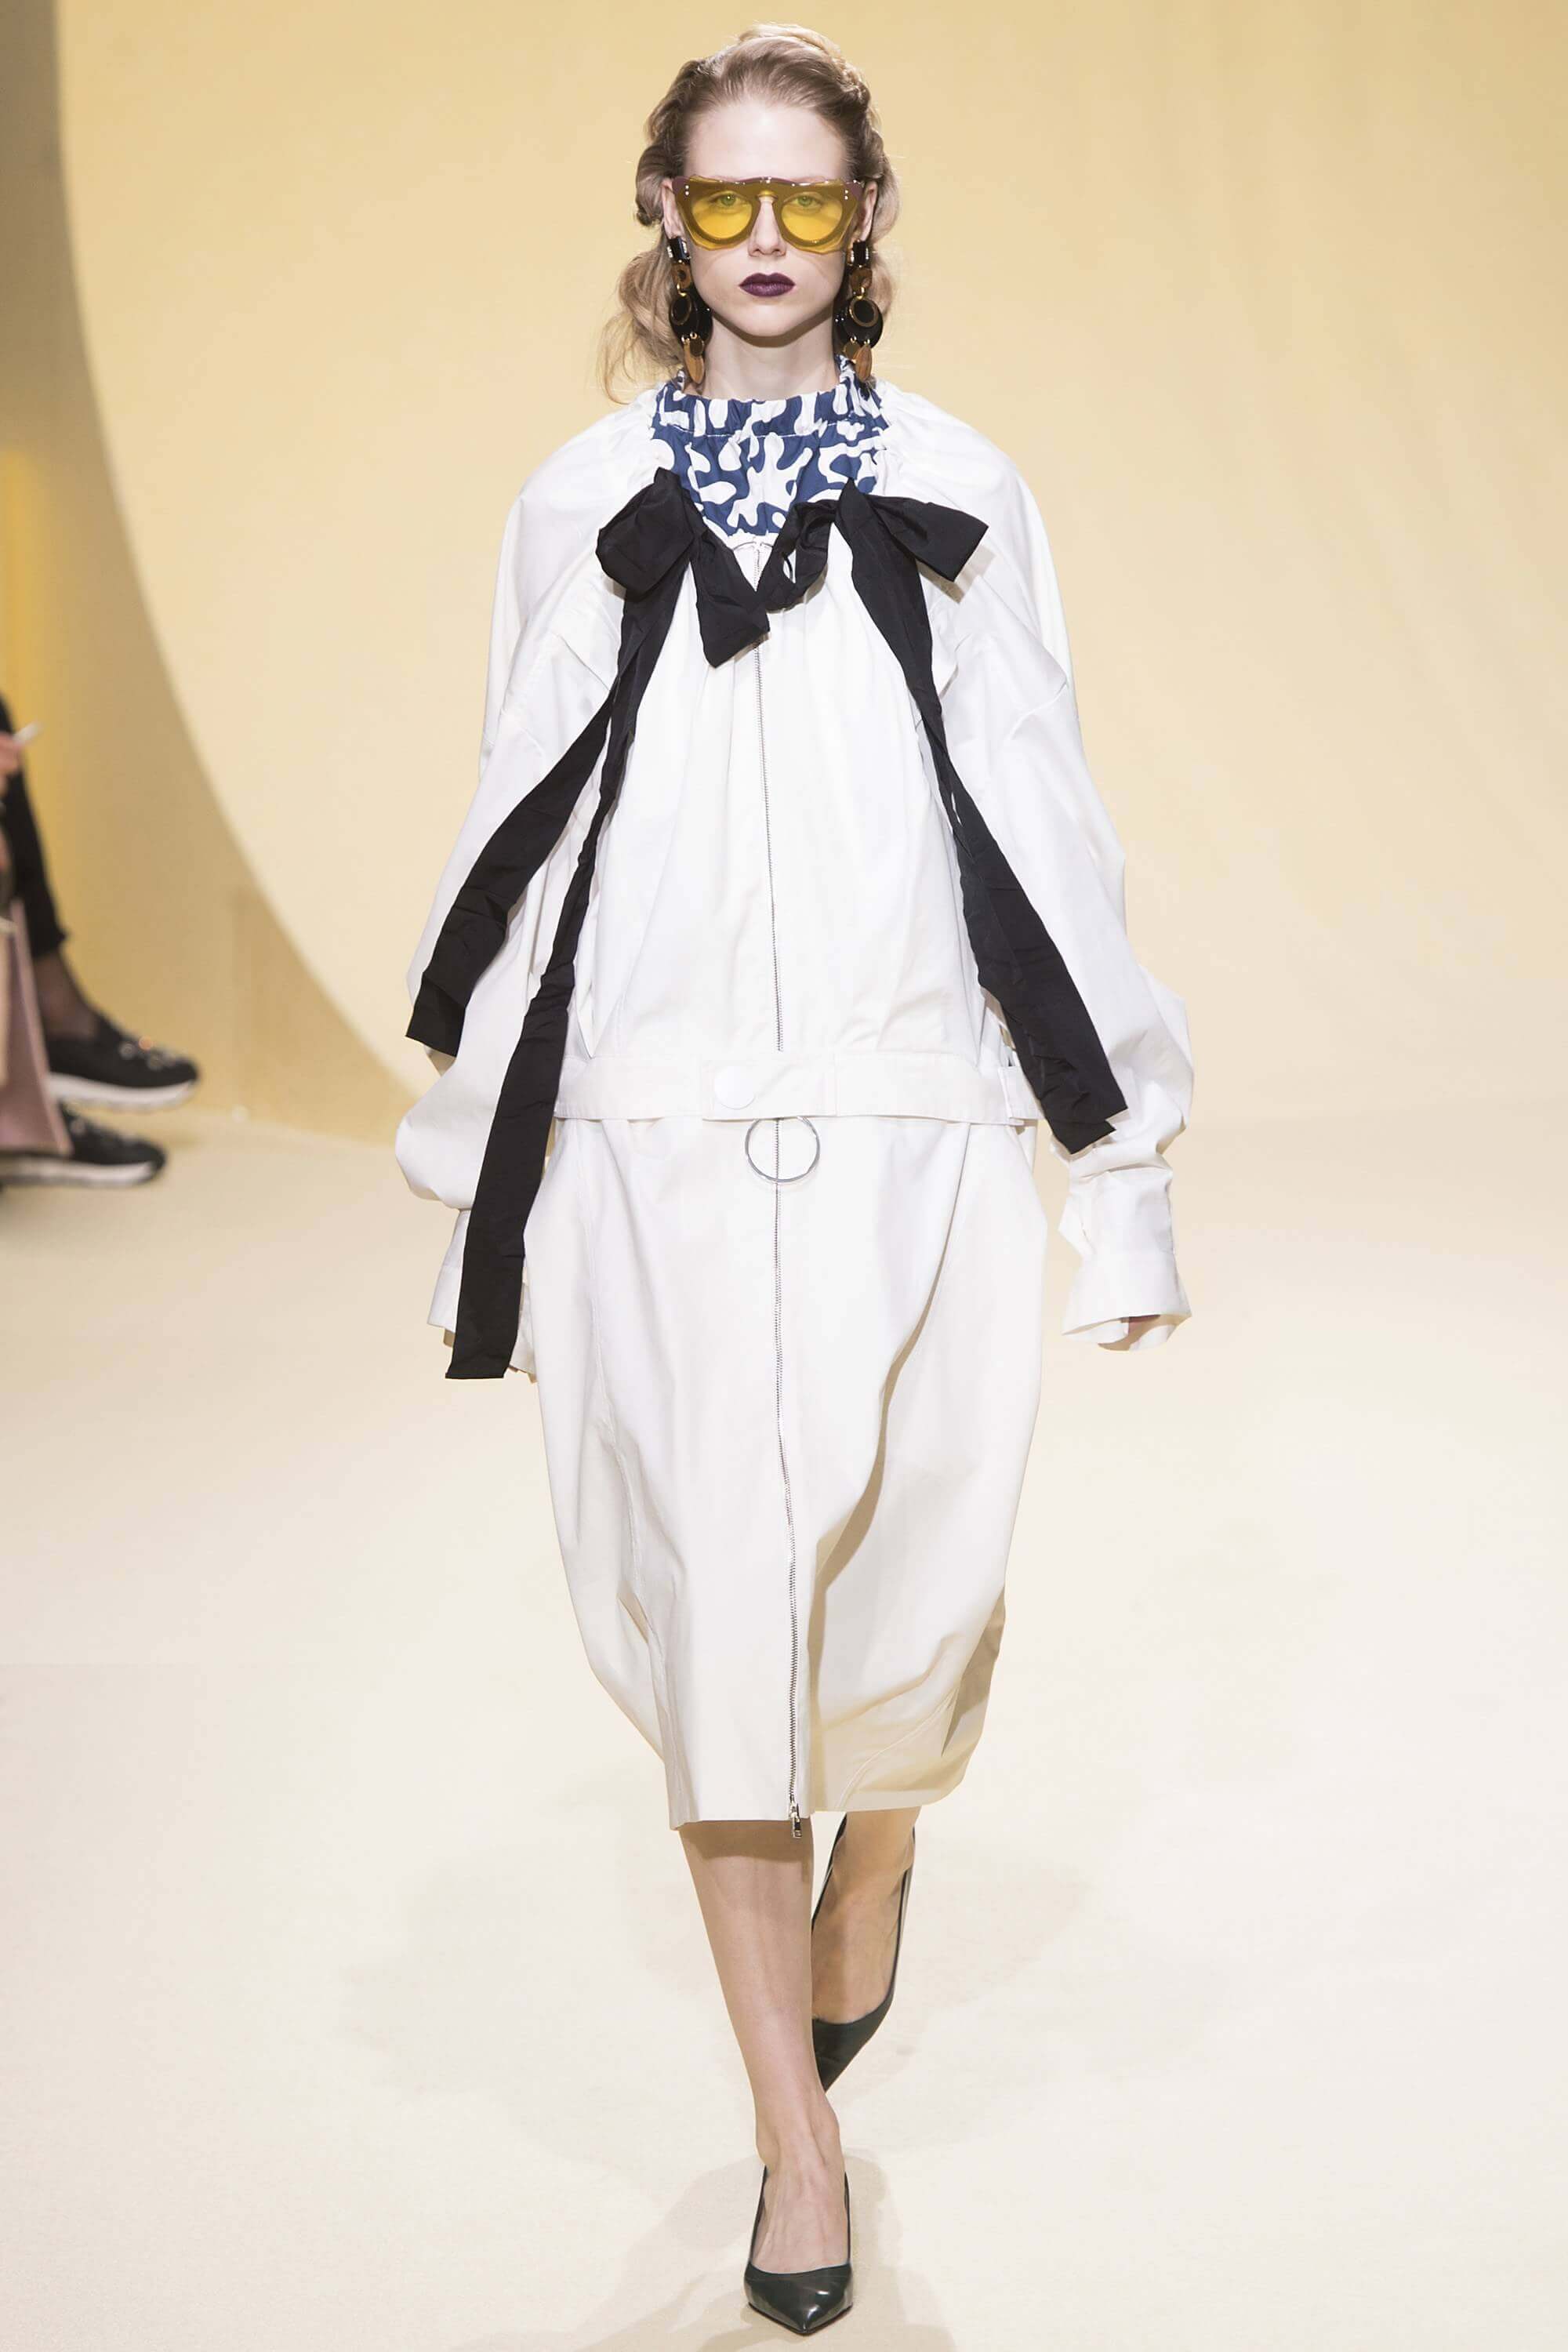 Marni Ready to Wear Fall 2016 Bows trend